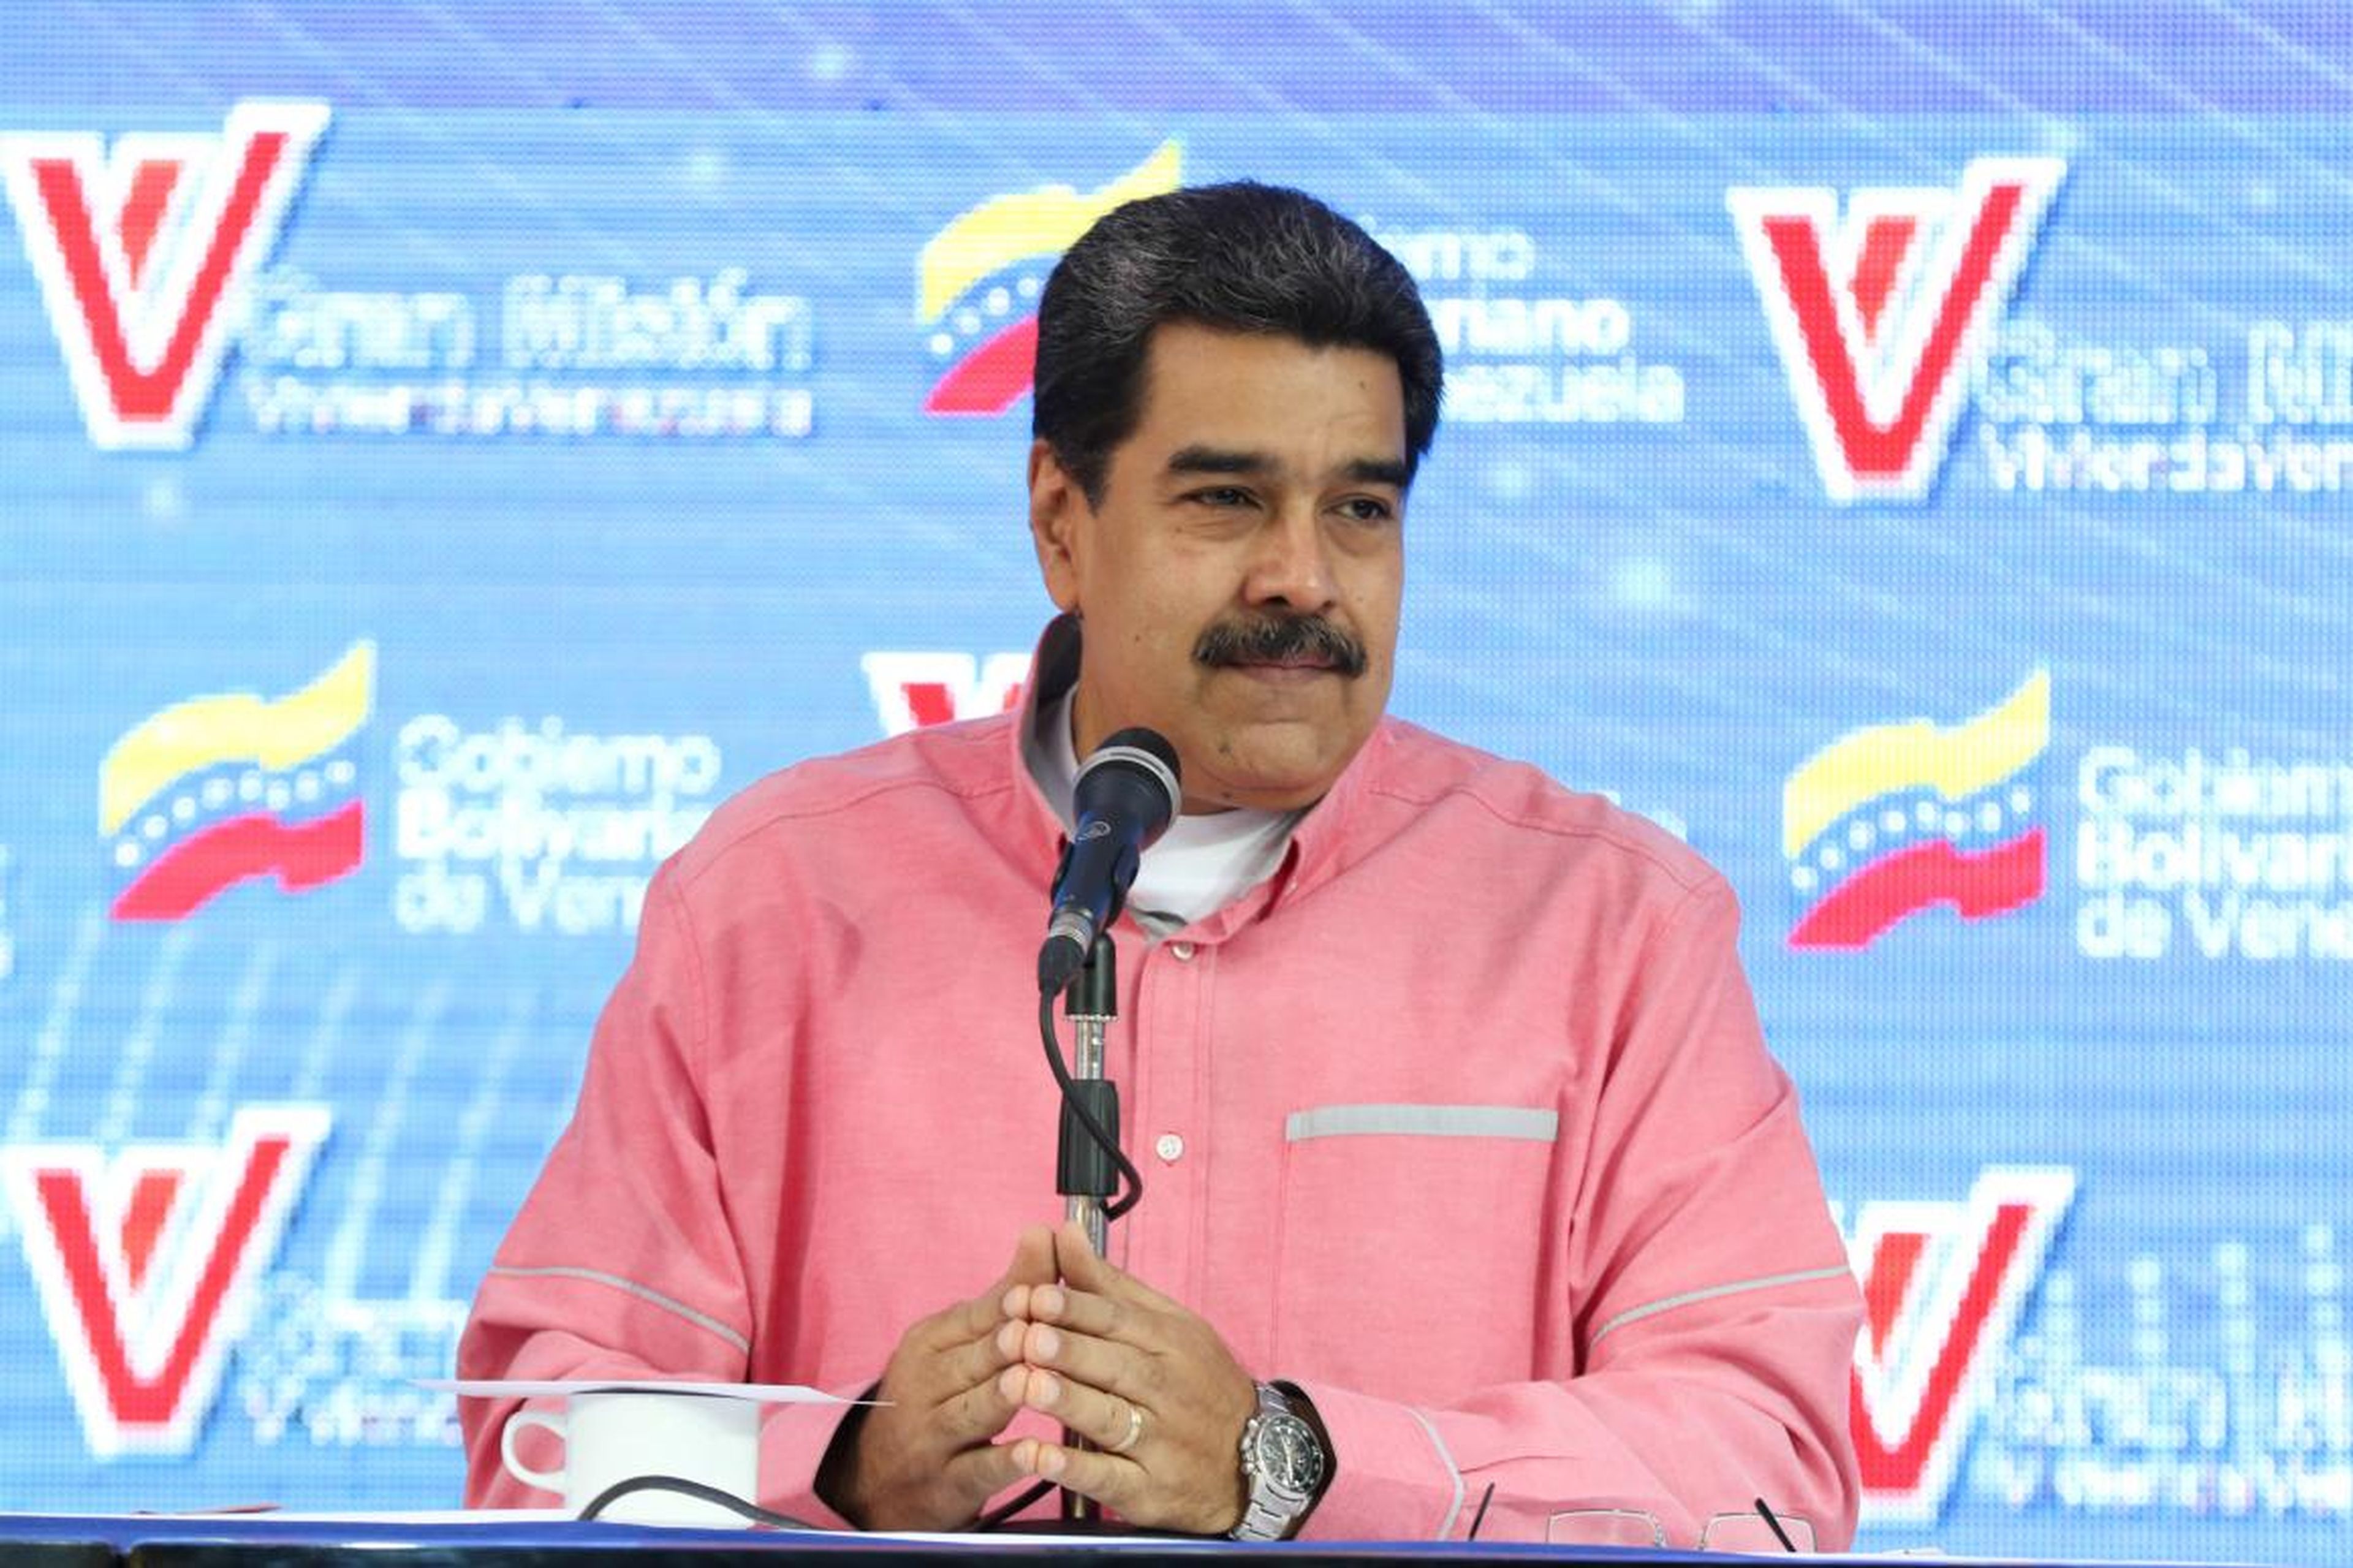 President Maduro has ordered 26 minimum wage increases in his six years in office, including a 300% increase earlier this year